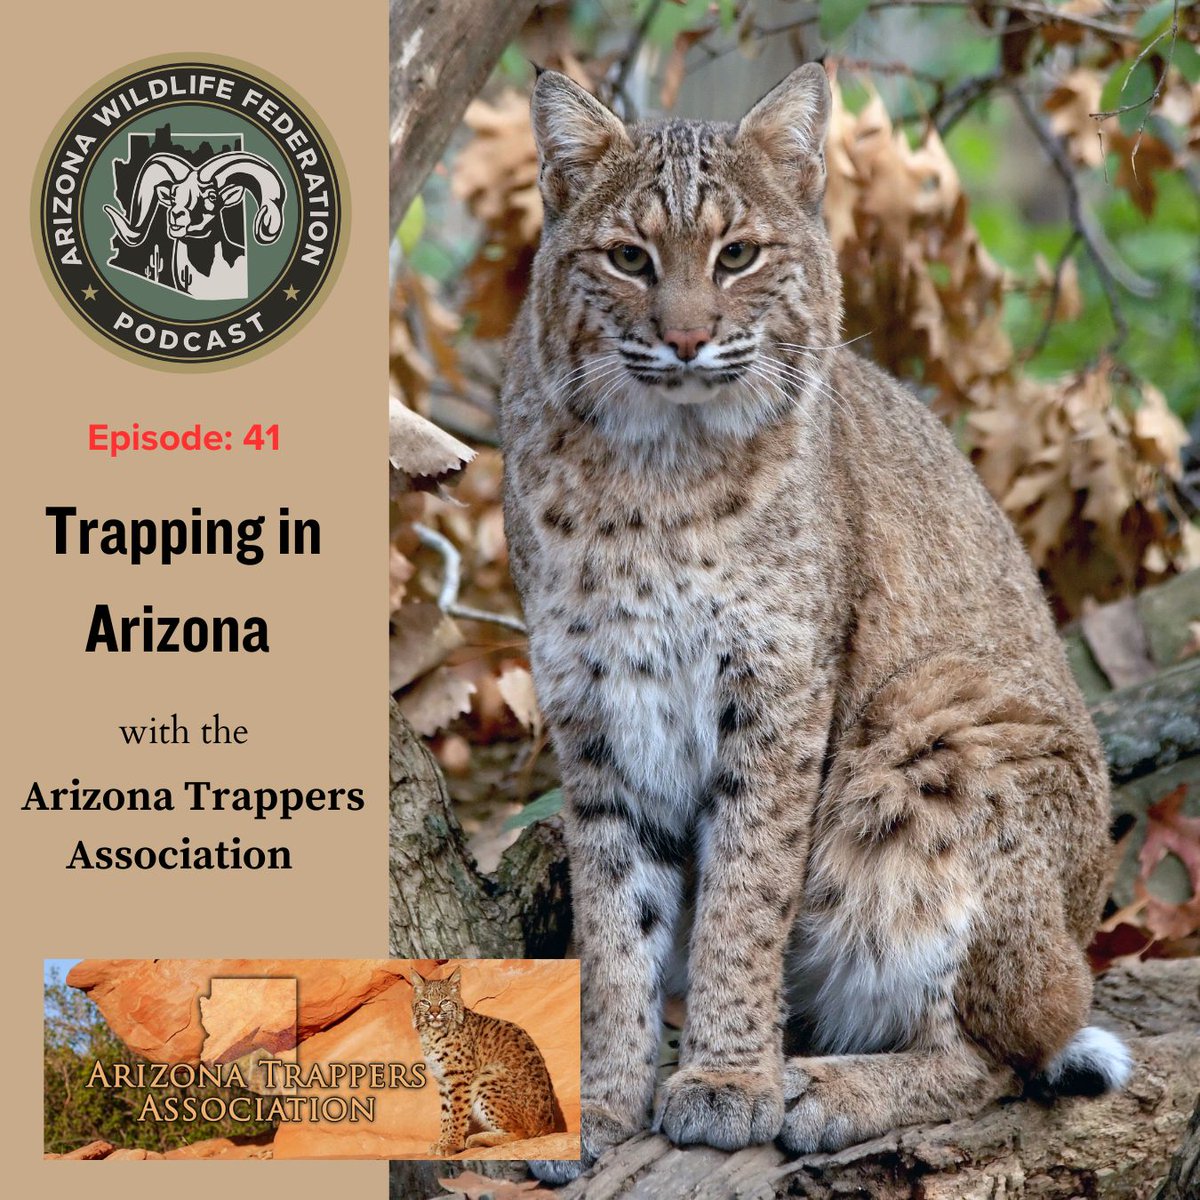 ⏰New Podcast Episode!⏰ Trapping for food and fur is an ancient pastime that is still practiced today by many. Listen in on this episode of the Arizona Wildlife Federation Podcast and learn all about trapping in Arizona. Listen here: podcastq5.podbean.com/e/trapping-in-…